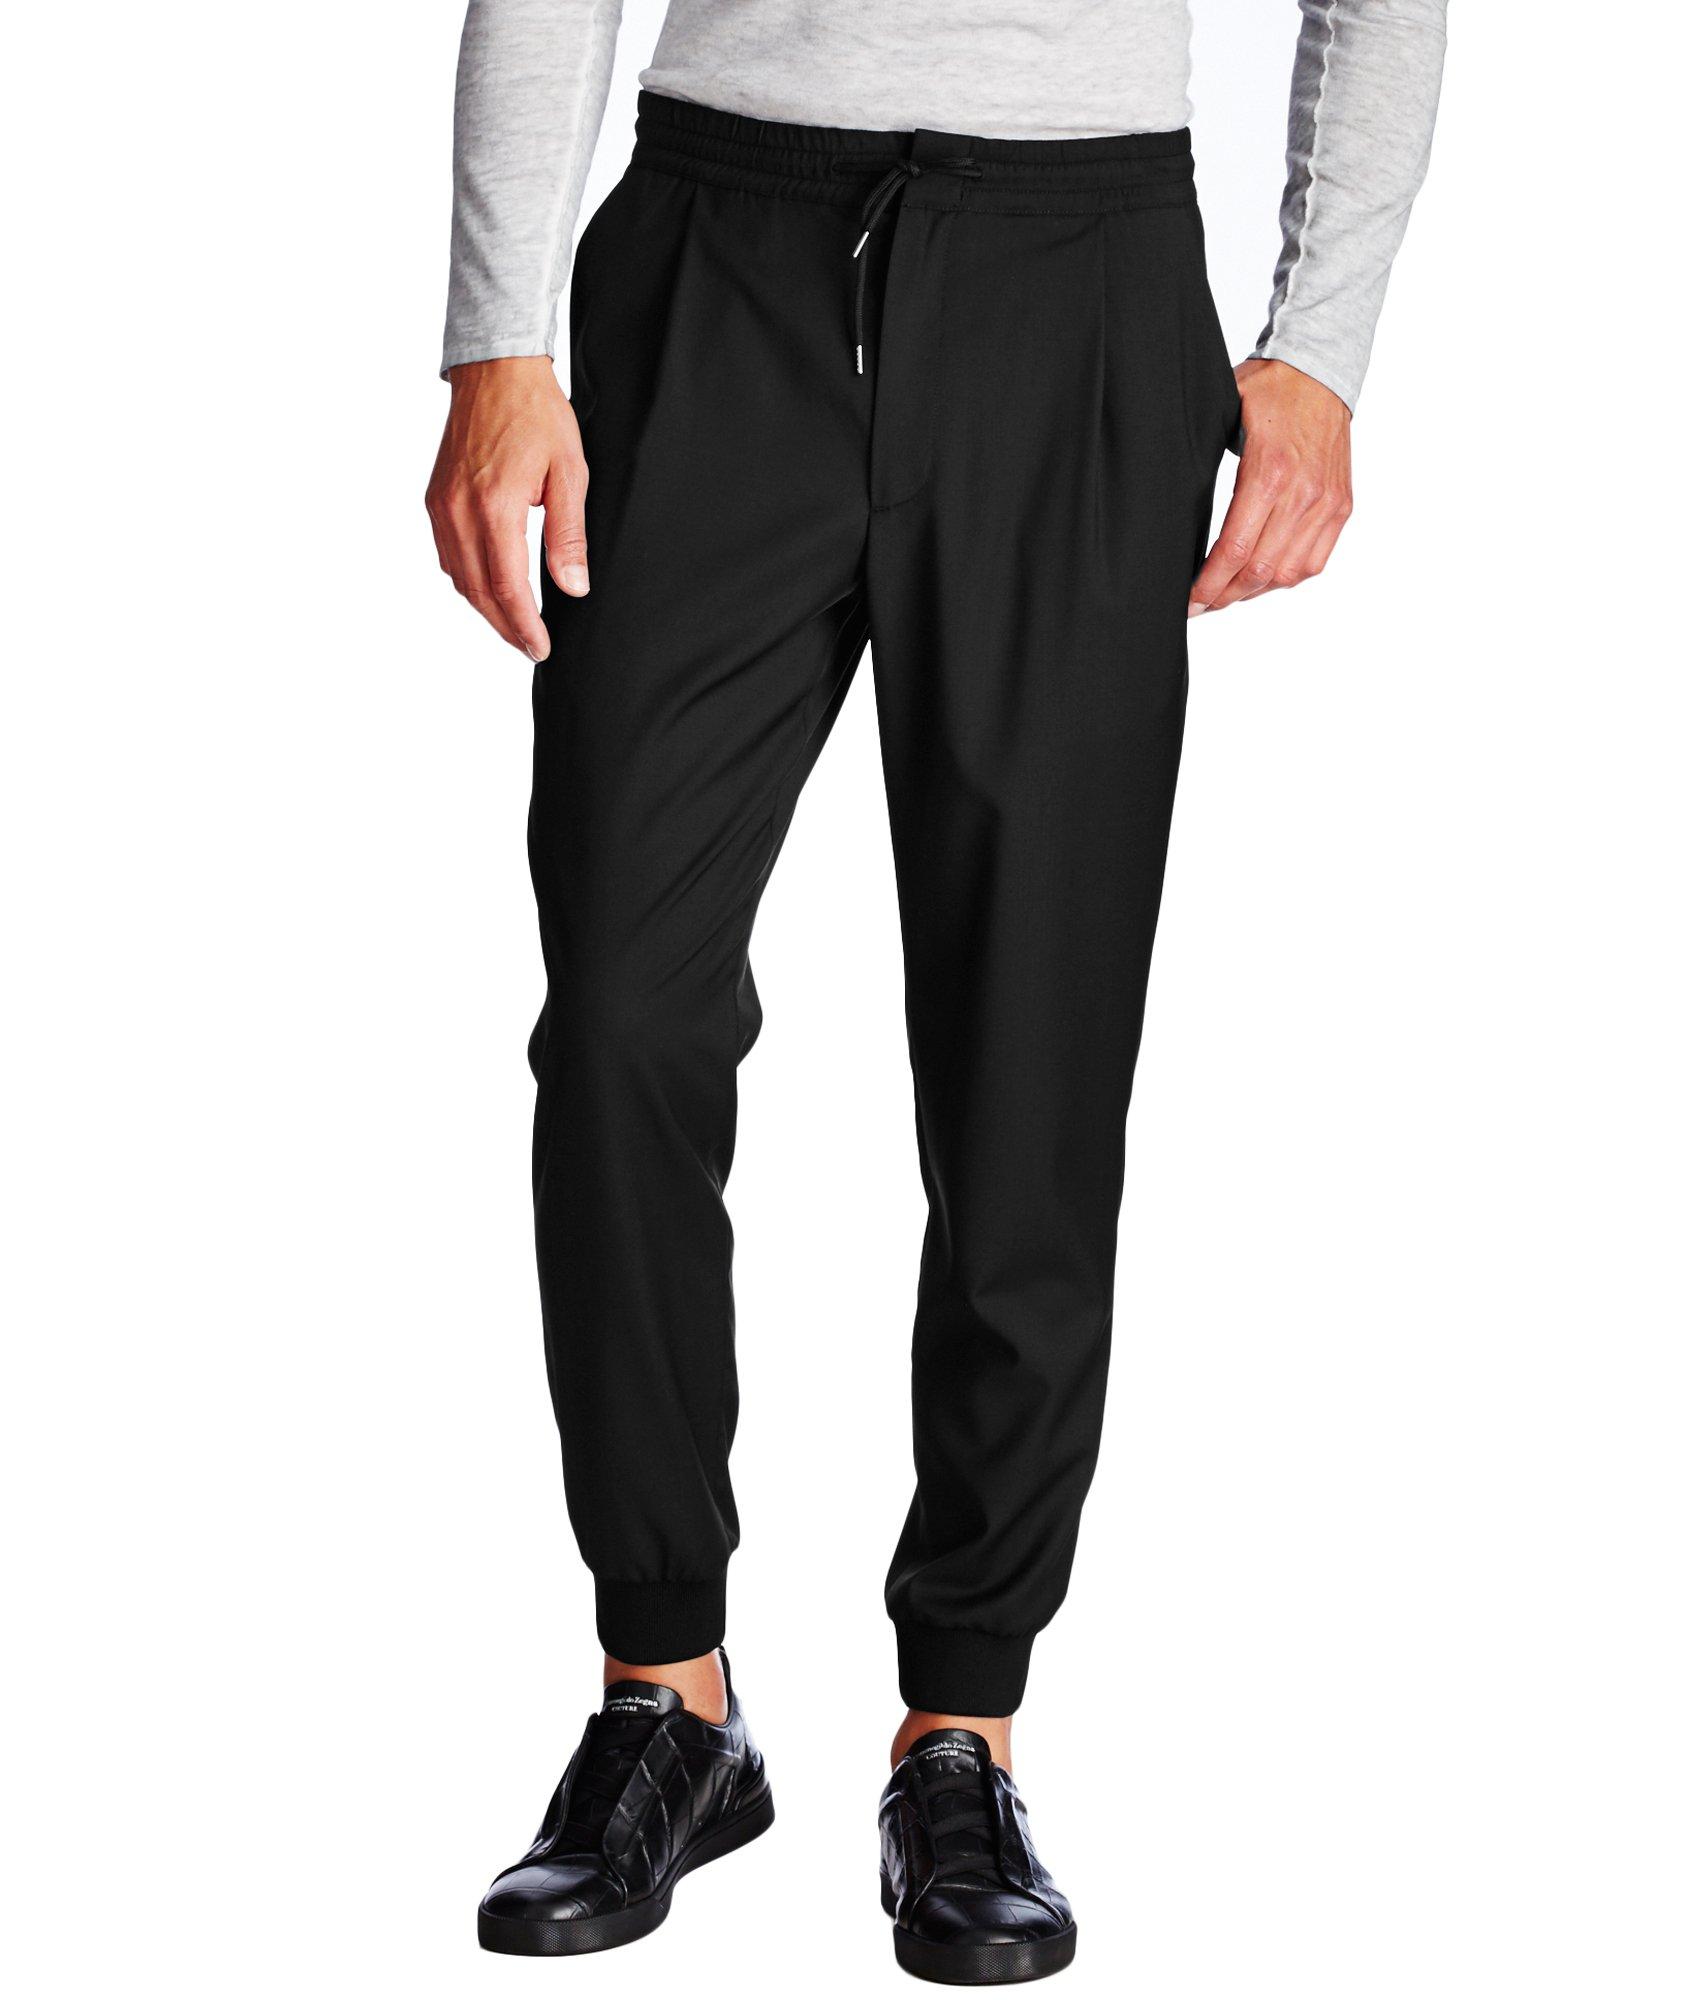 Pleated Wool Joggers  image 0